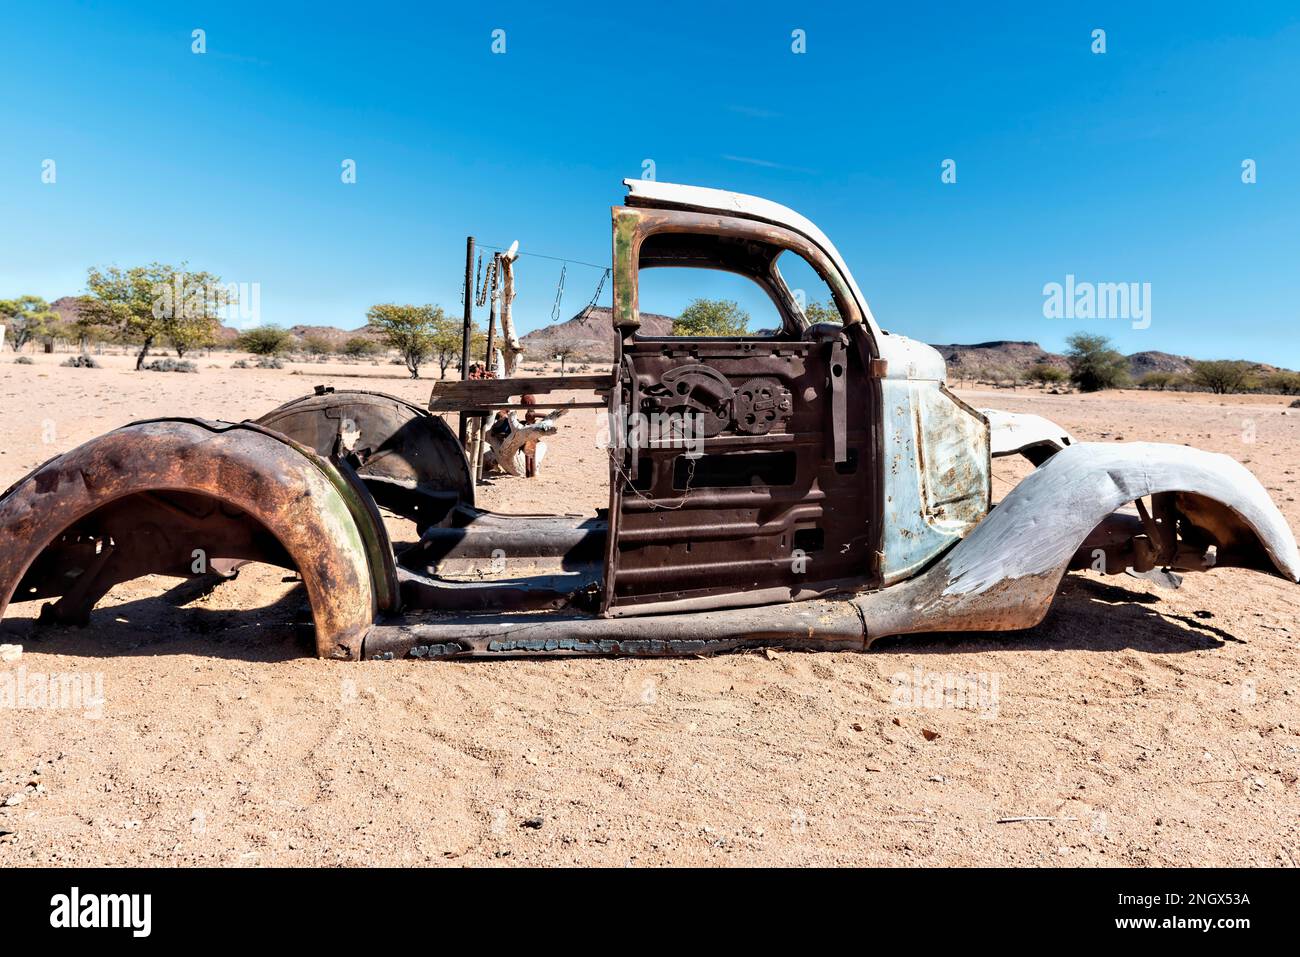 Namibia, Africa. Car wreckage in the desert Stock Photo